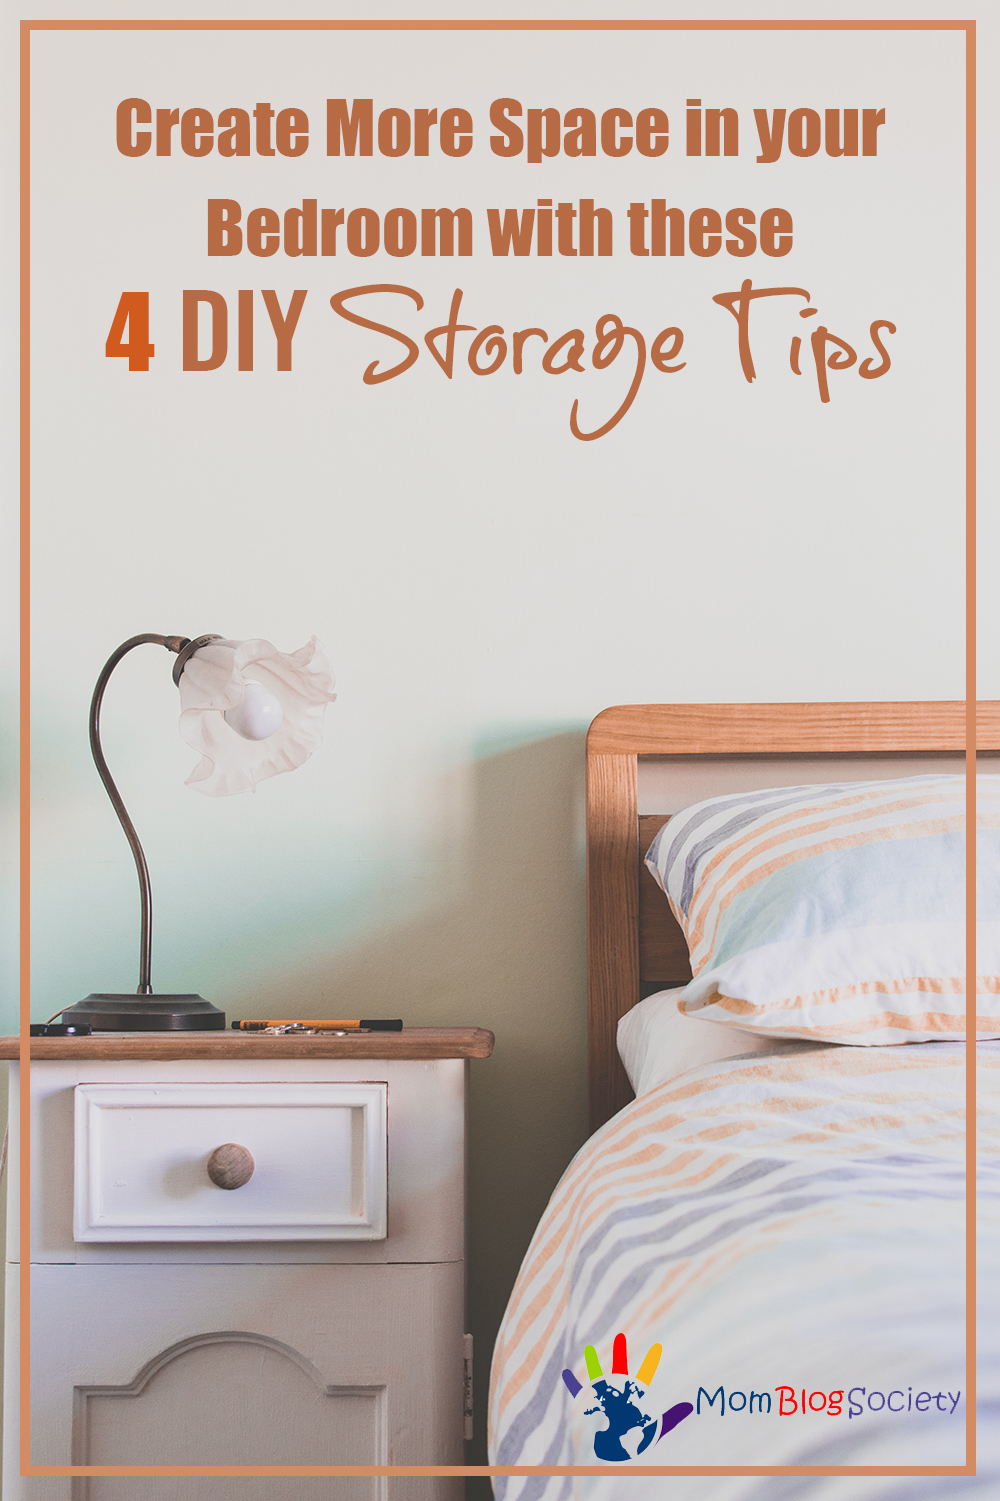 Create More Space in your Bedroom with these 4 DIY Storage Tips